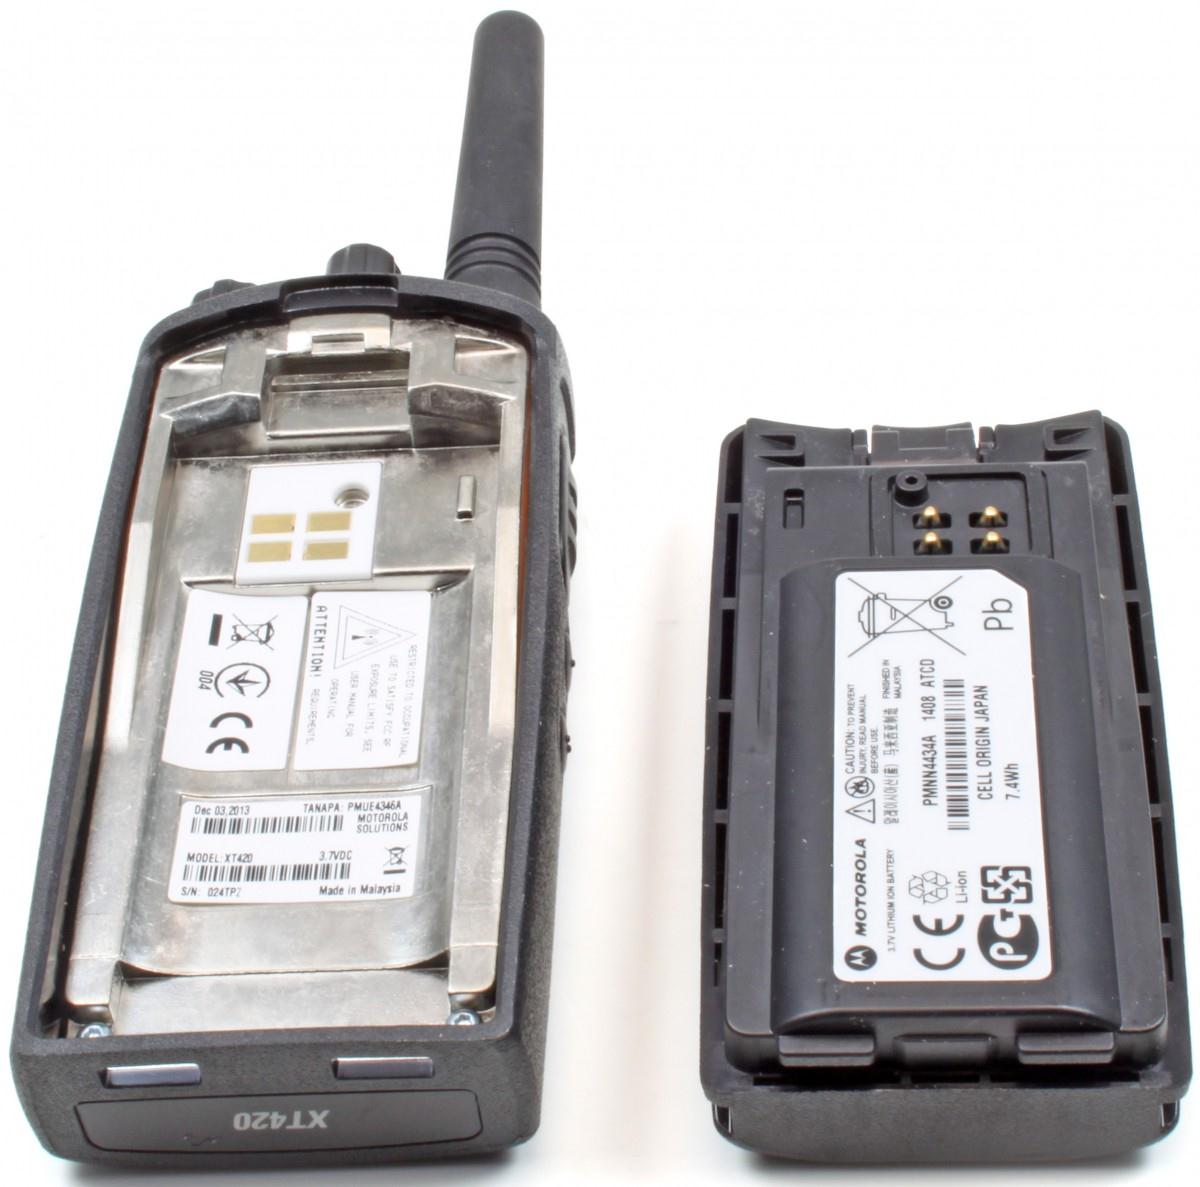 XT420 Two Way Radio without Display